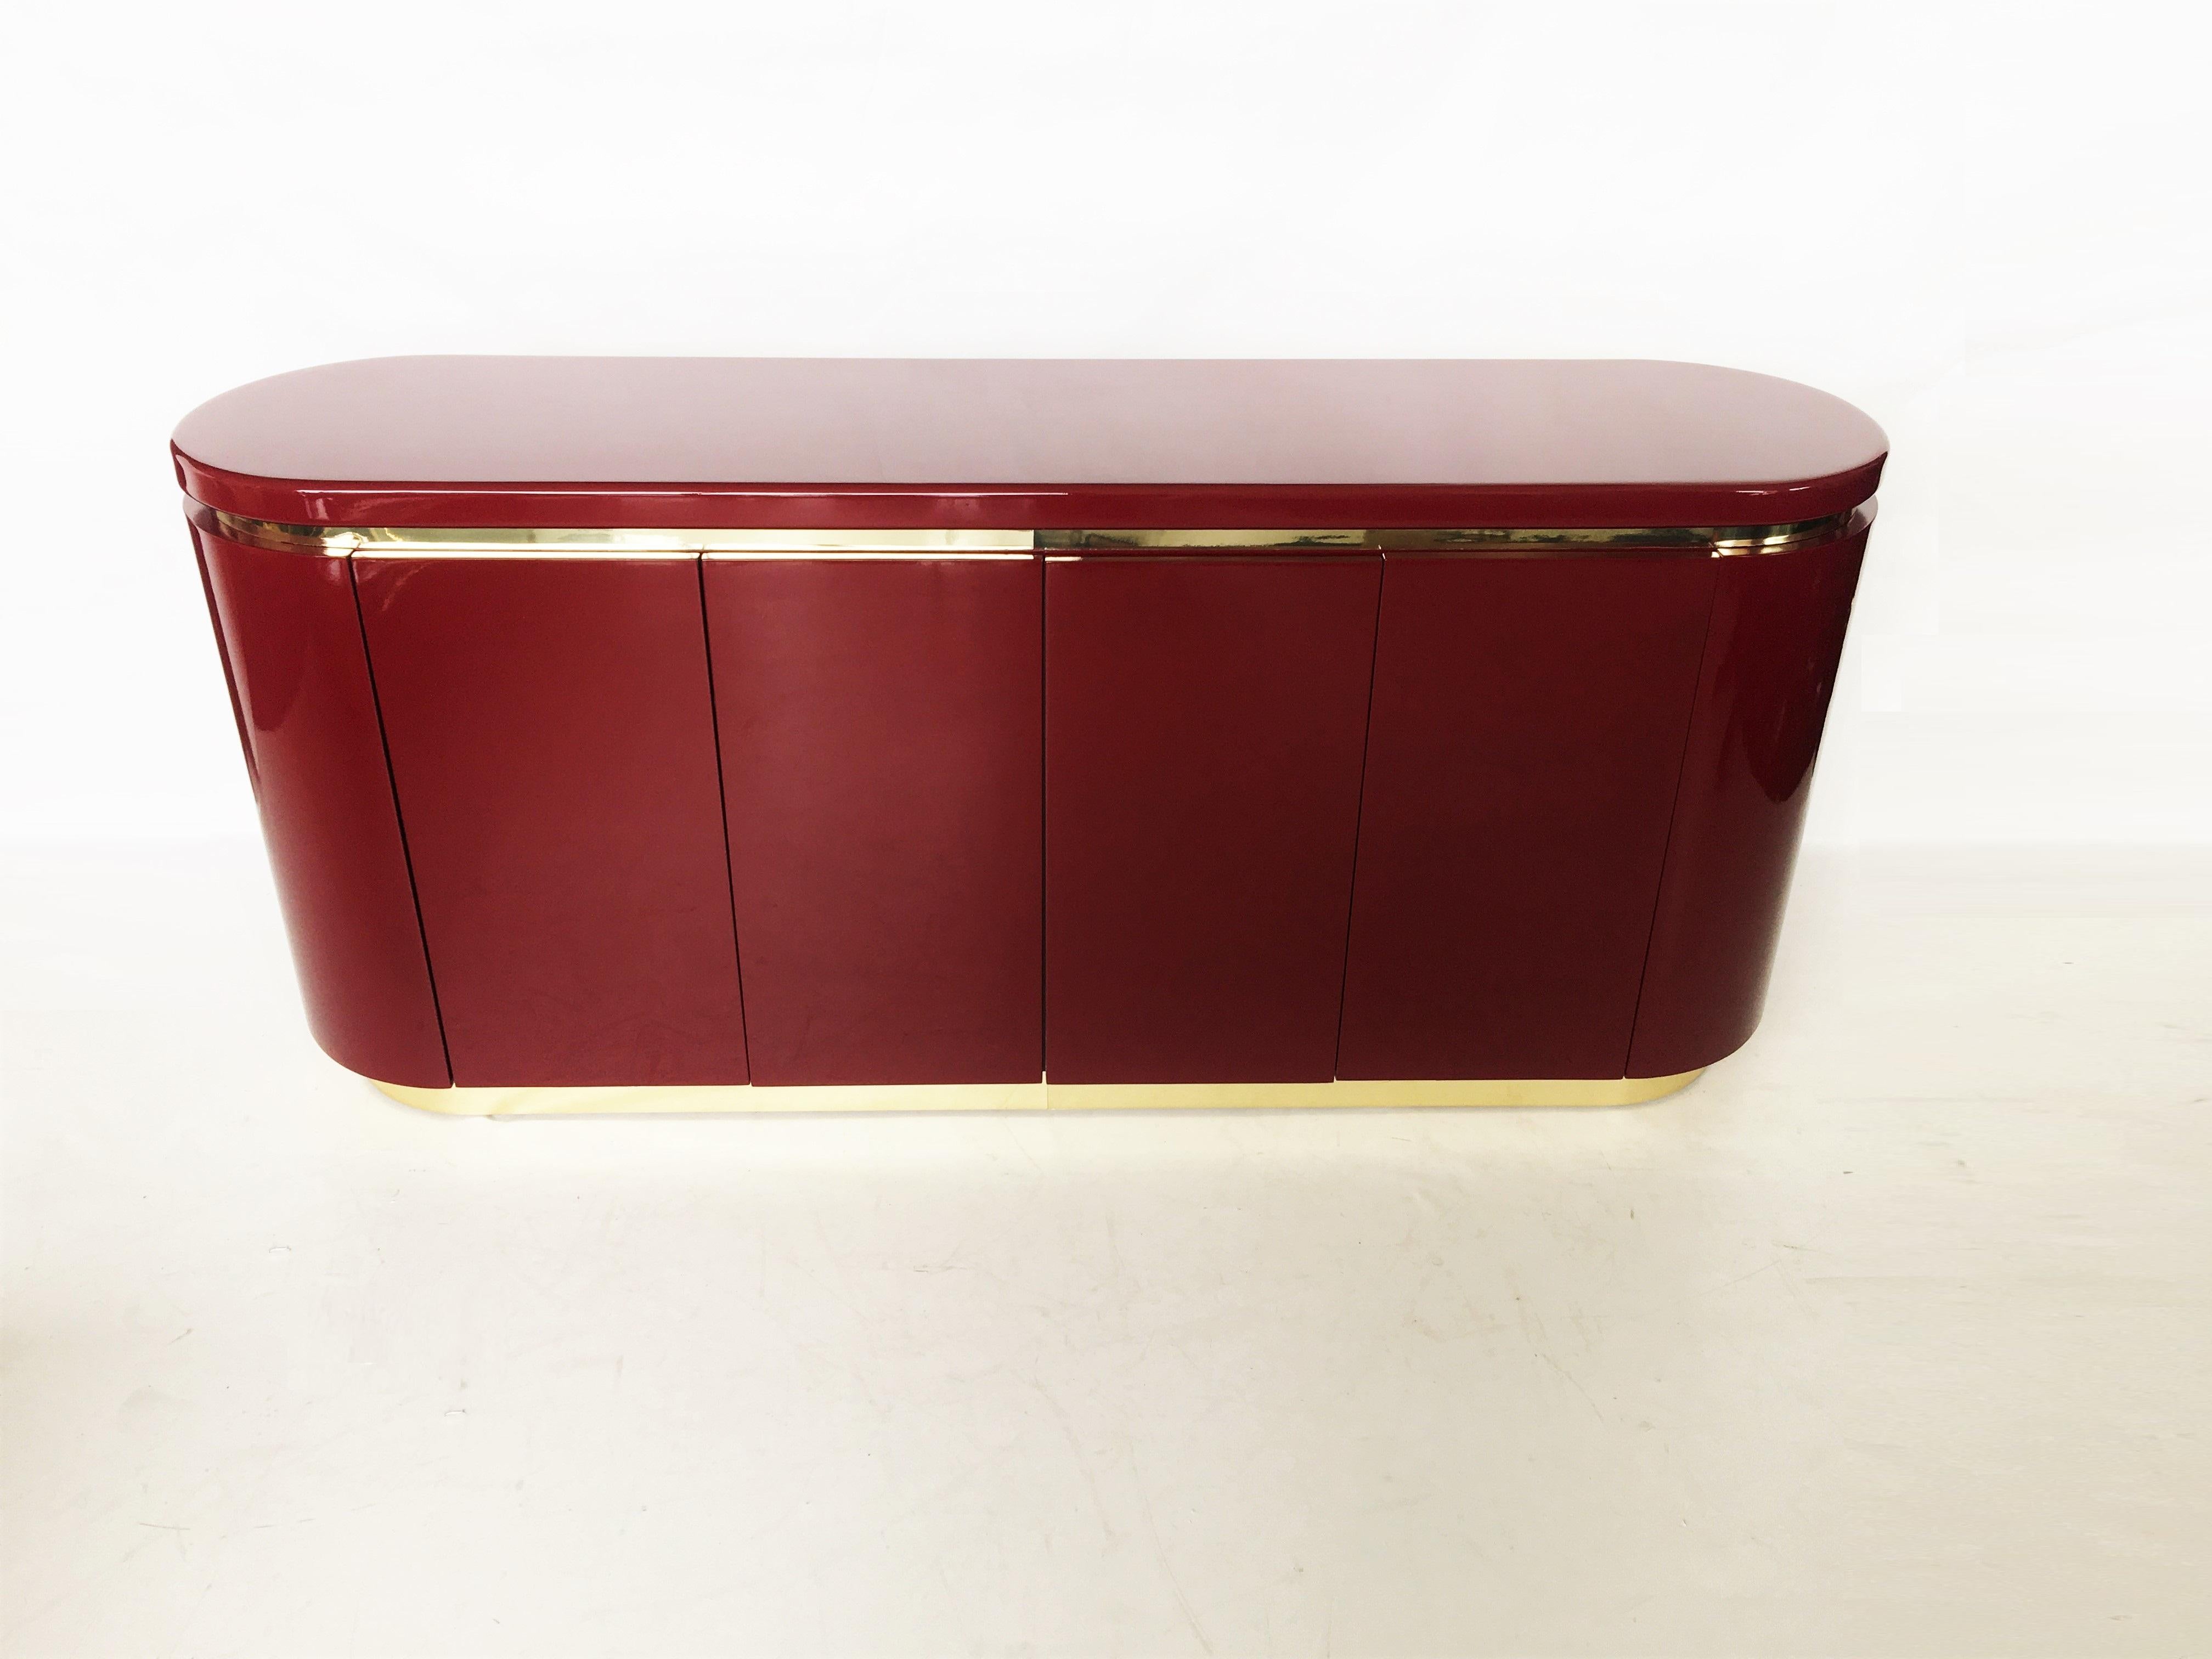 Breathtaking piece of late midcentury design by Mastercraft Furniture Co. Proportionally exceptional, embodying a 